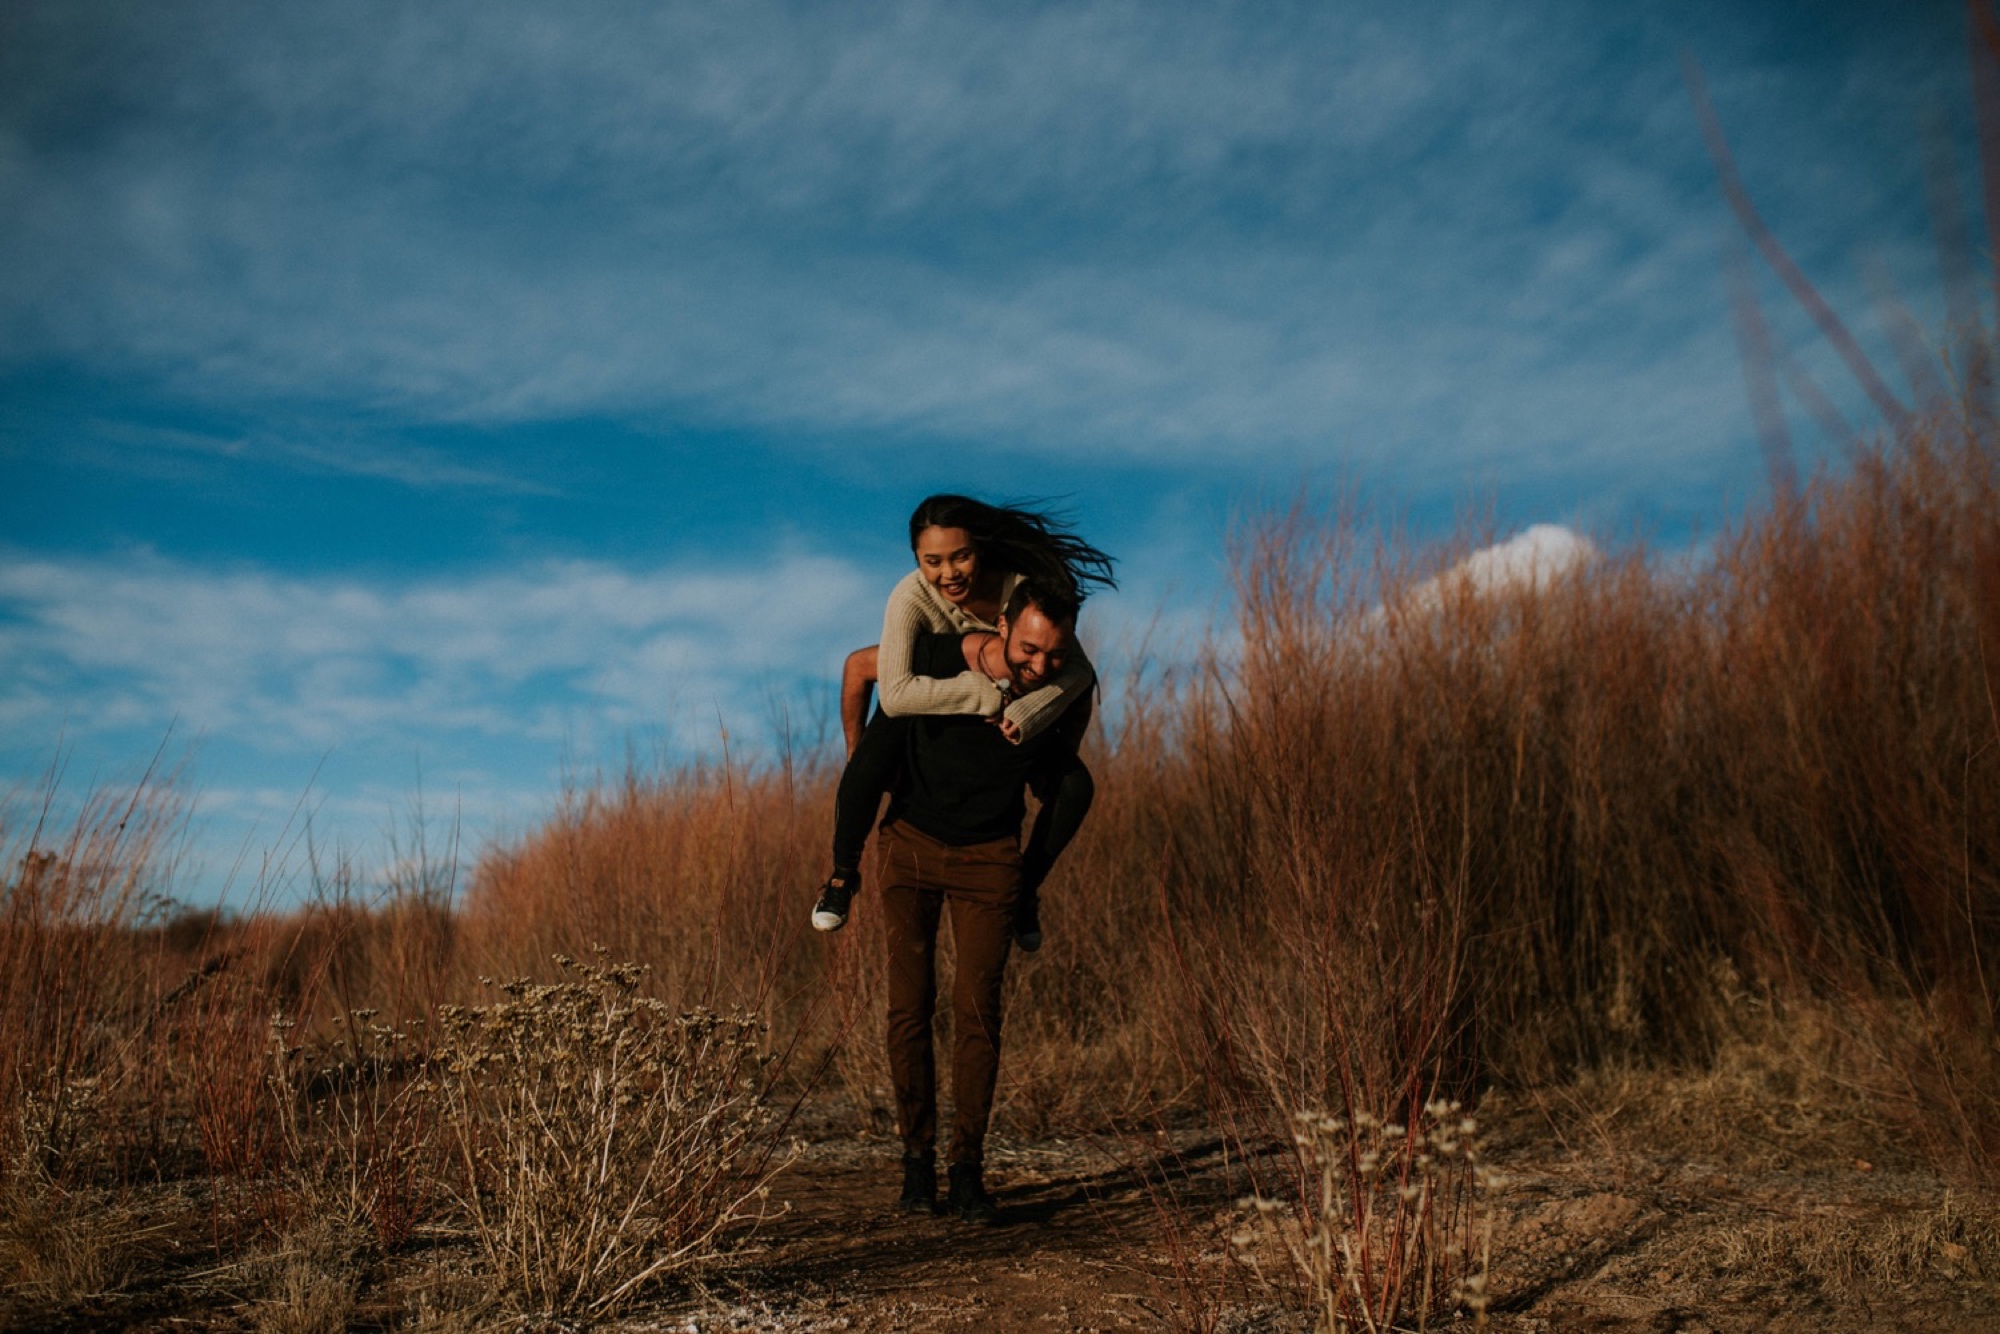  I loved working with Xamie and Nate on this incredible couples portrait session at the Alameda Bosque Open Space in Albuquerque, New Mexico. Our session started off with grey overcast skies that made for some moody portraits! Xamie and Nate’s outfit